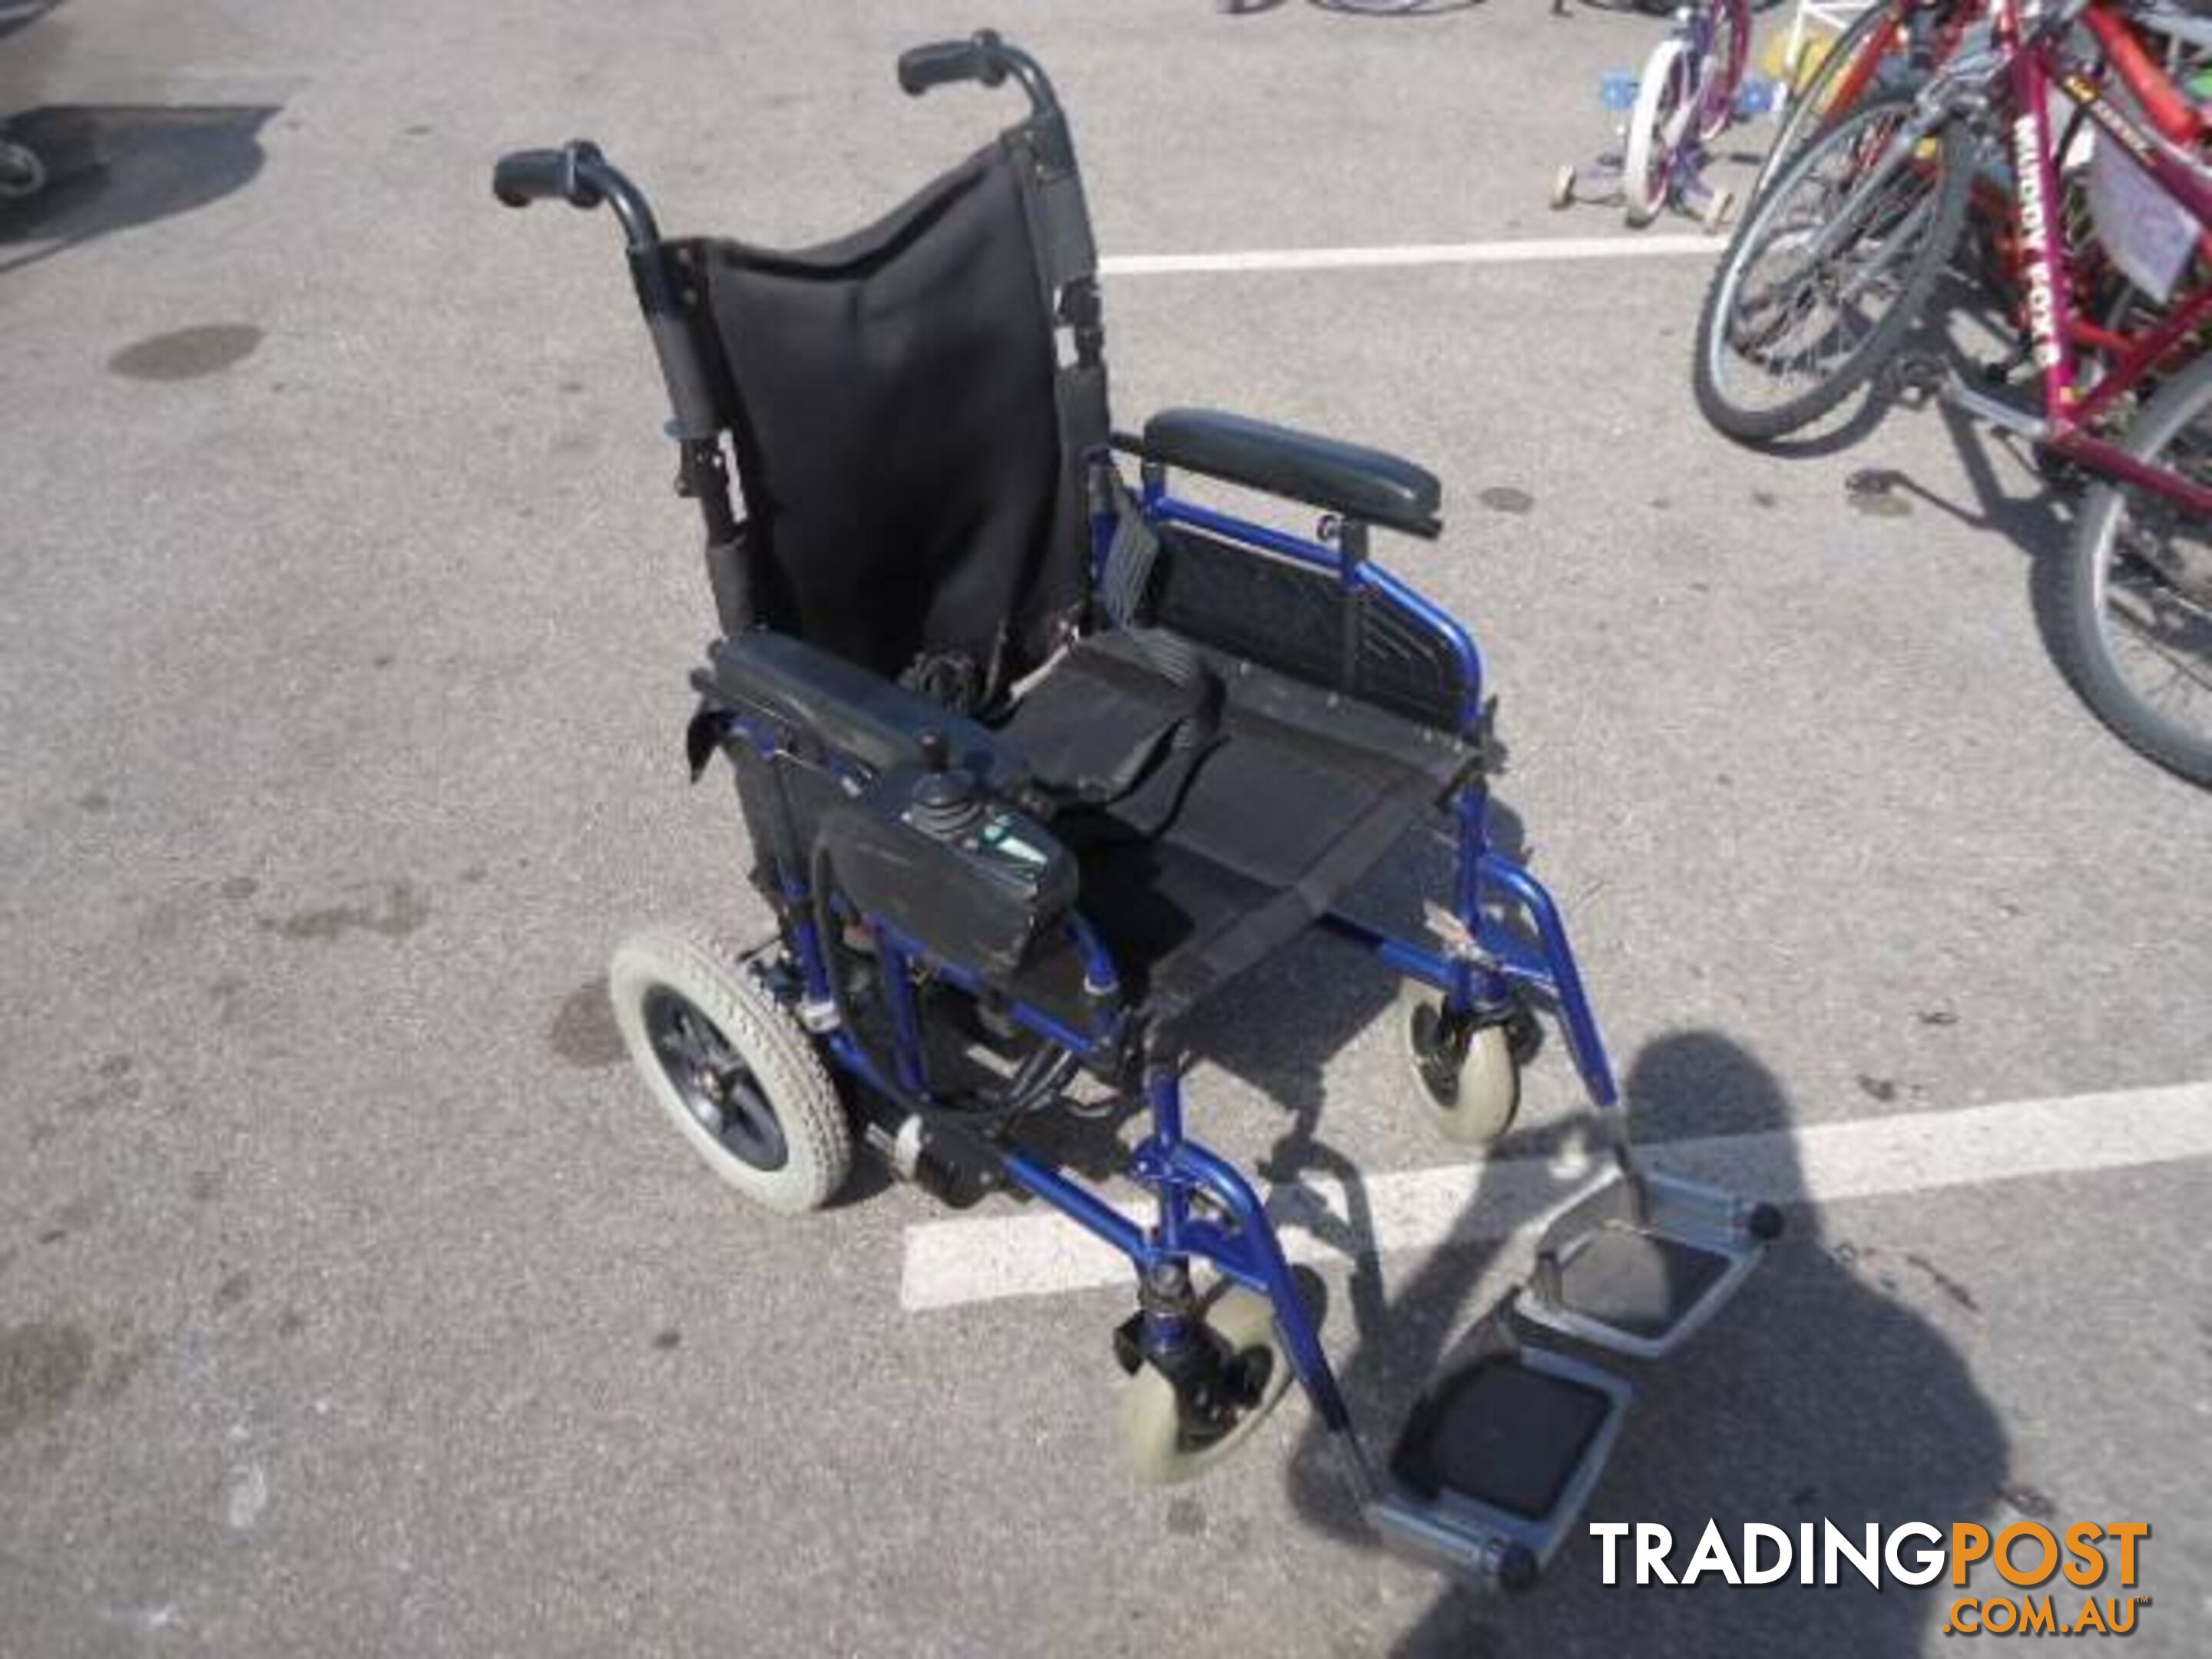 PRIDE ELECTRIC / POWERCHAIR WHEELCHAIR, GREAT CONIDITION